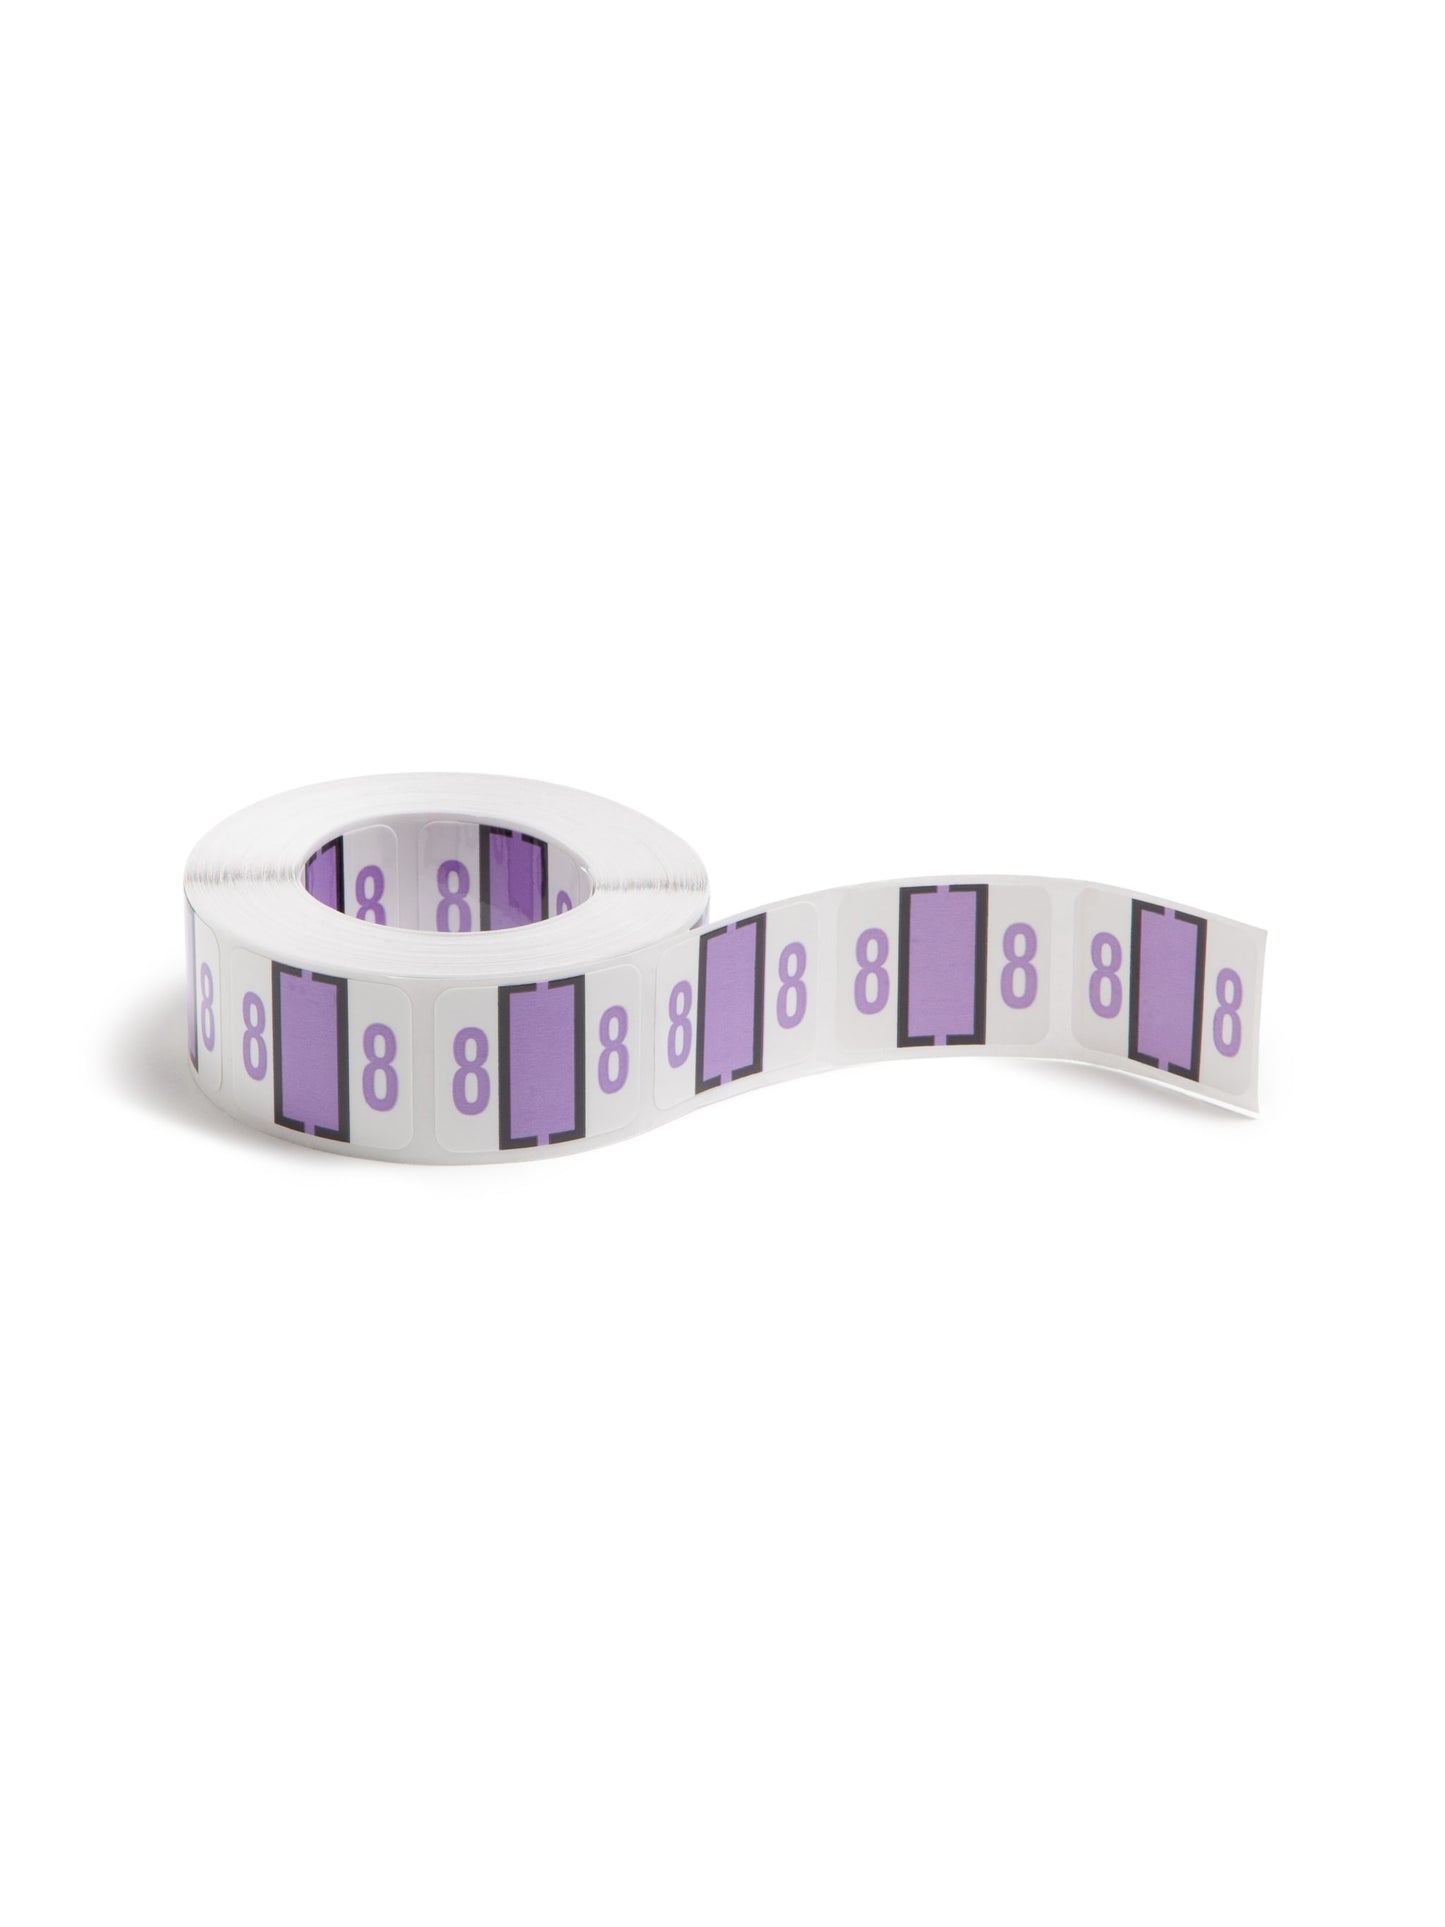 BCCRN Bar Style Color-Coded Numeric Labels, 0-9 Rolls, Lavender Color, 1-1/4" X 1" Size, Set of 1, 086486673785